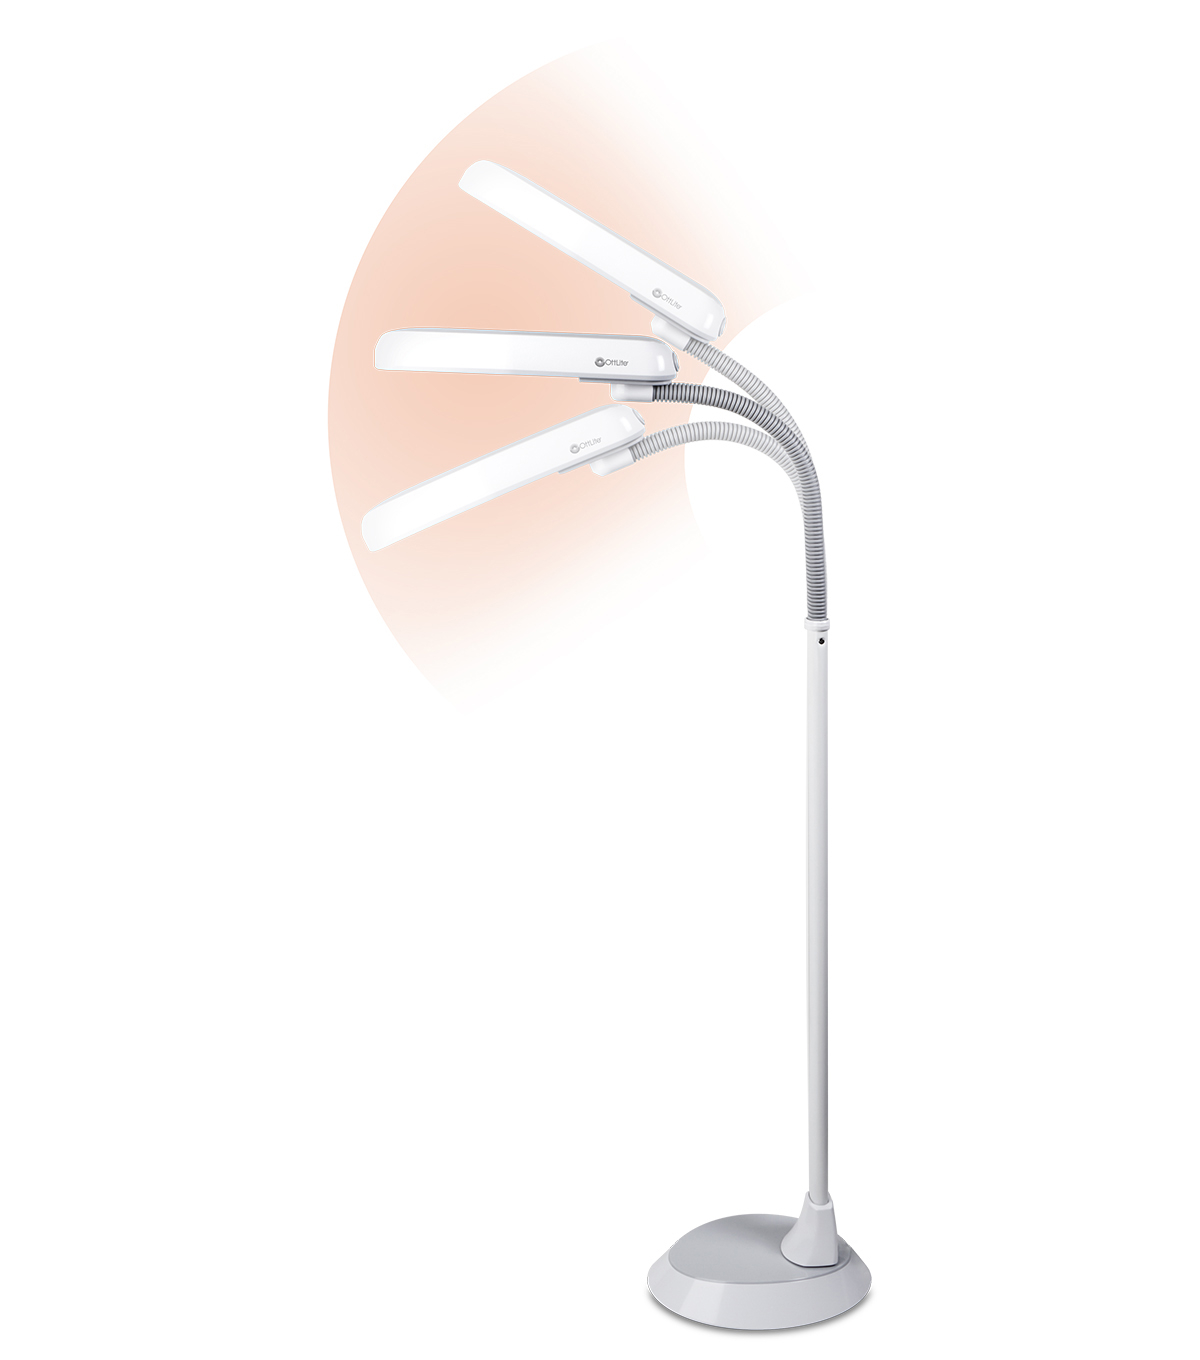 Ottlite 18w High Definition Floor Lamp pertaining to size 1200 X 1360